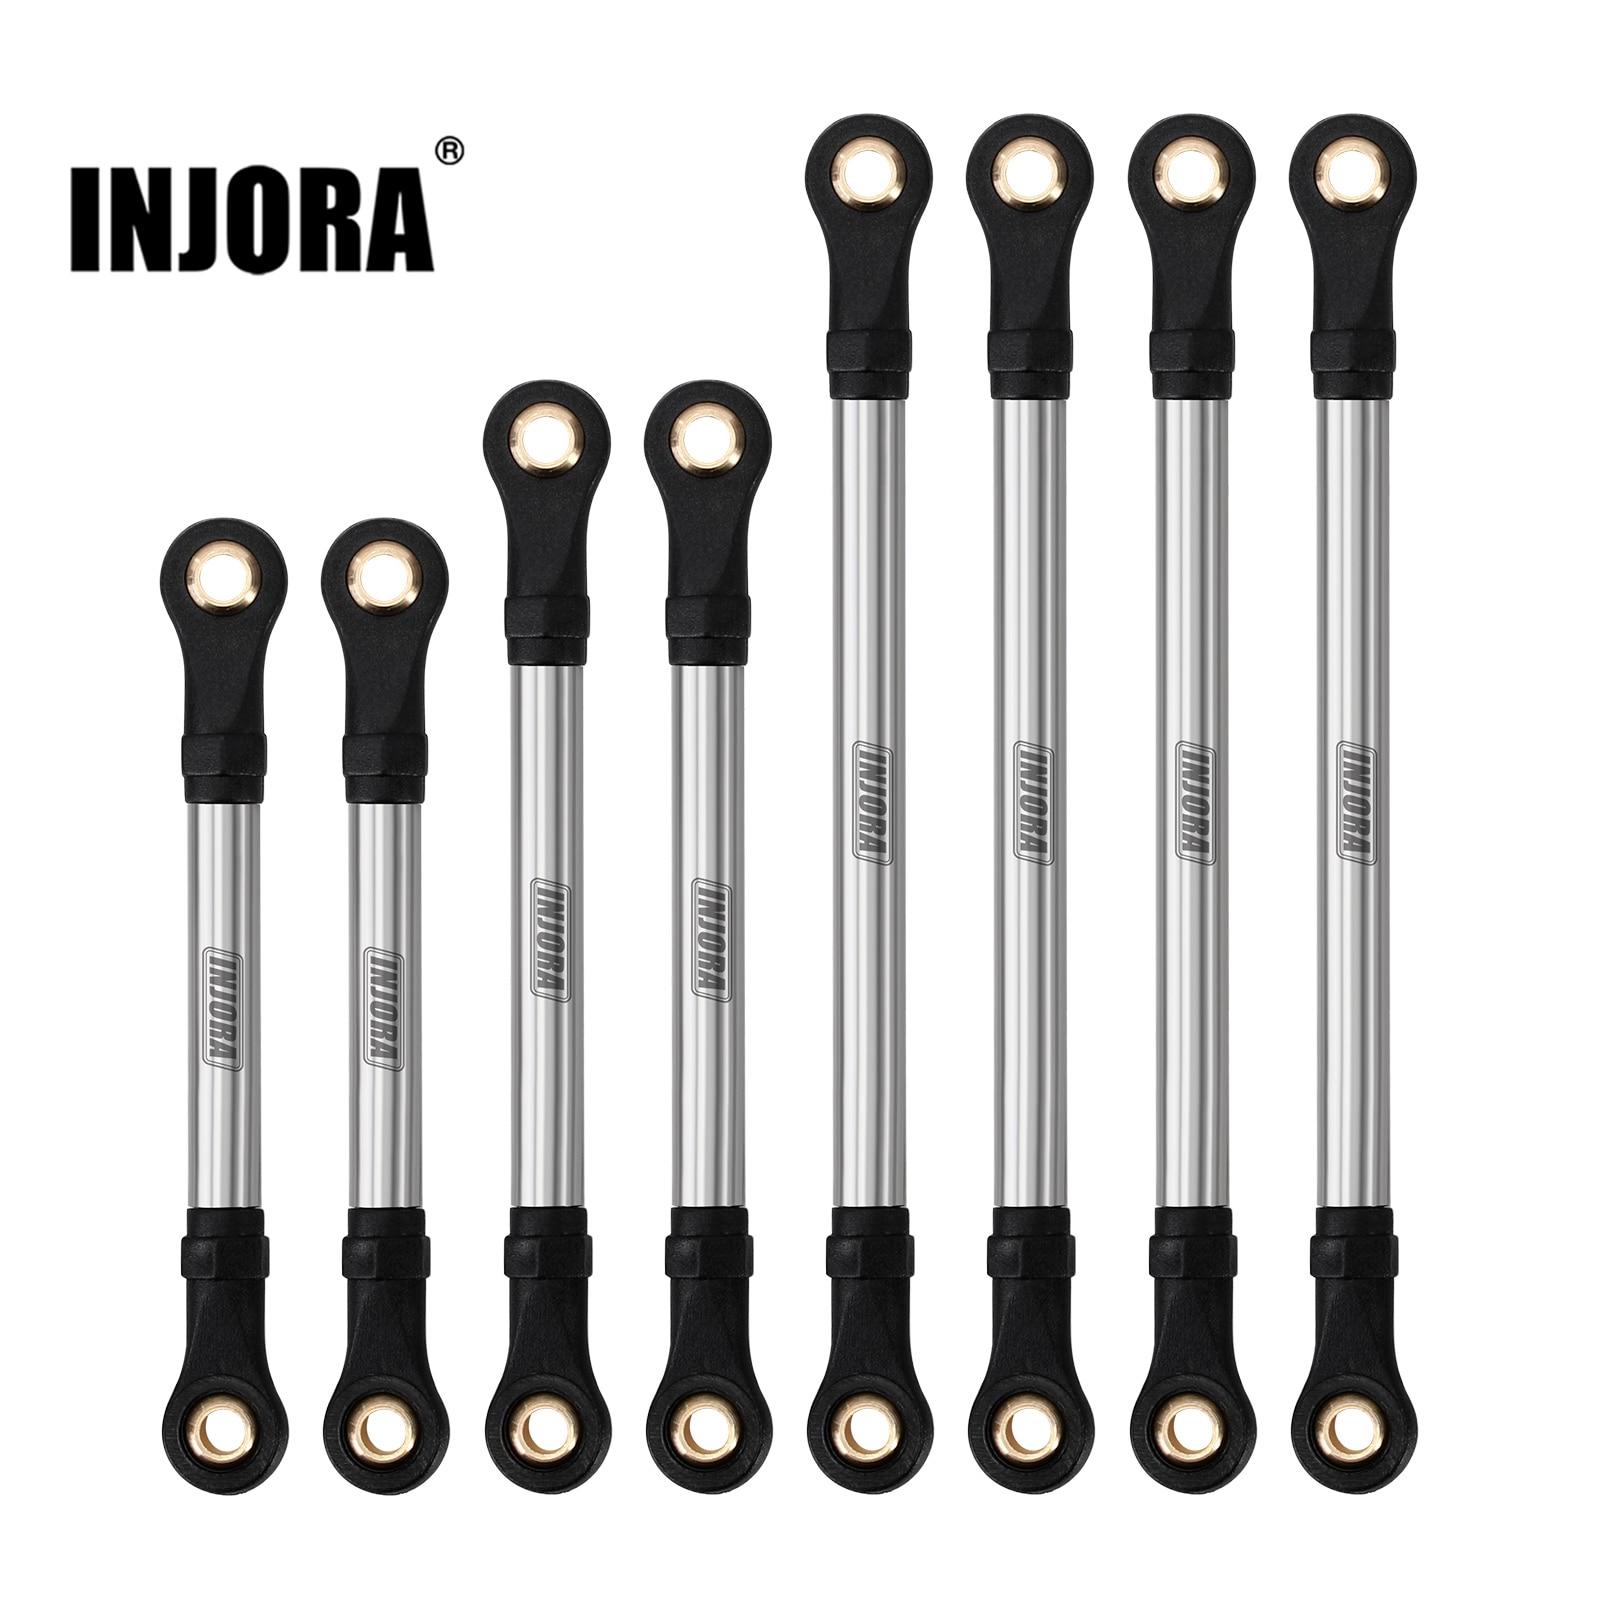 INJORA-Stainless-Steel-Straight-Chassis-Links-for-1-18-RC-Crawler-TRX4M-Upgrade-4M-64.jpg